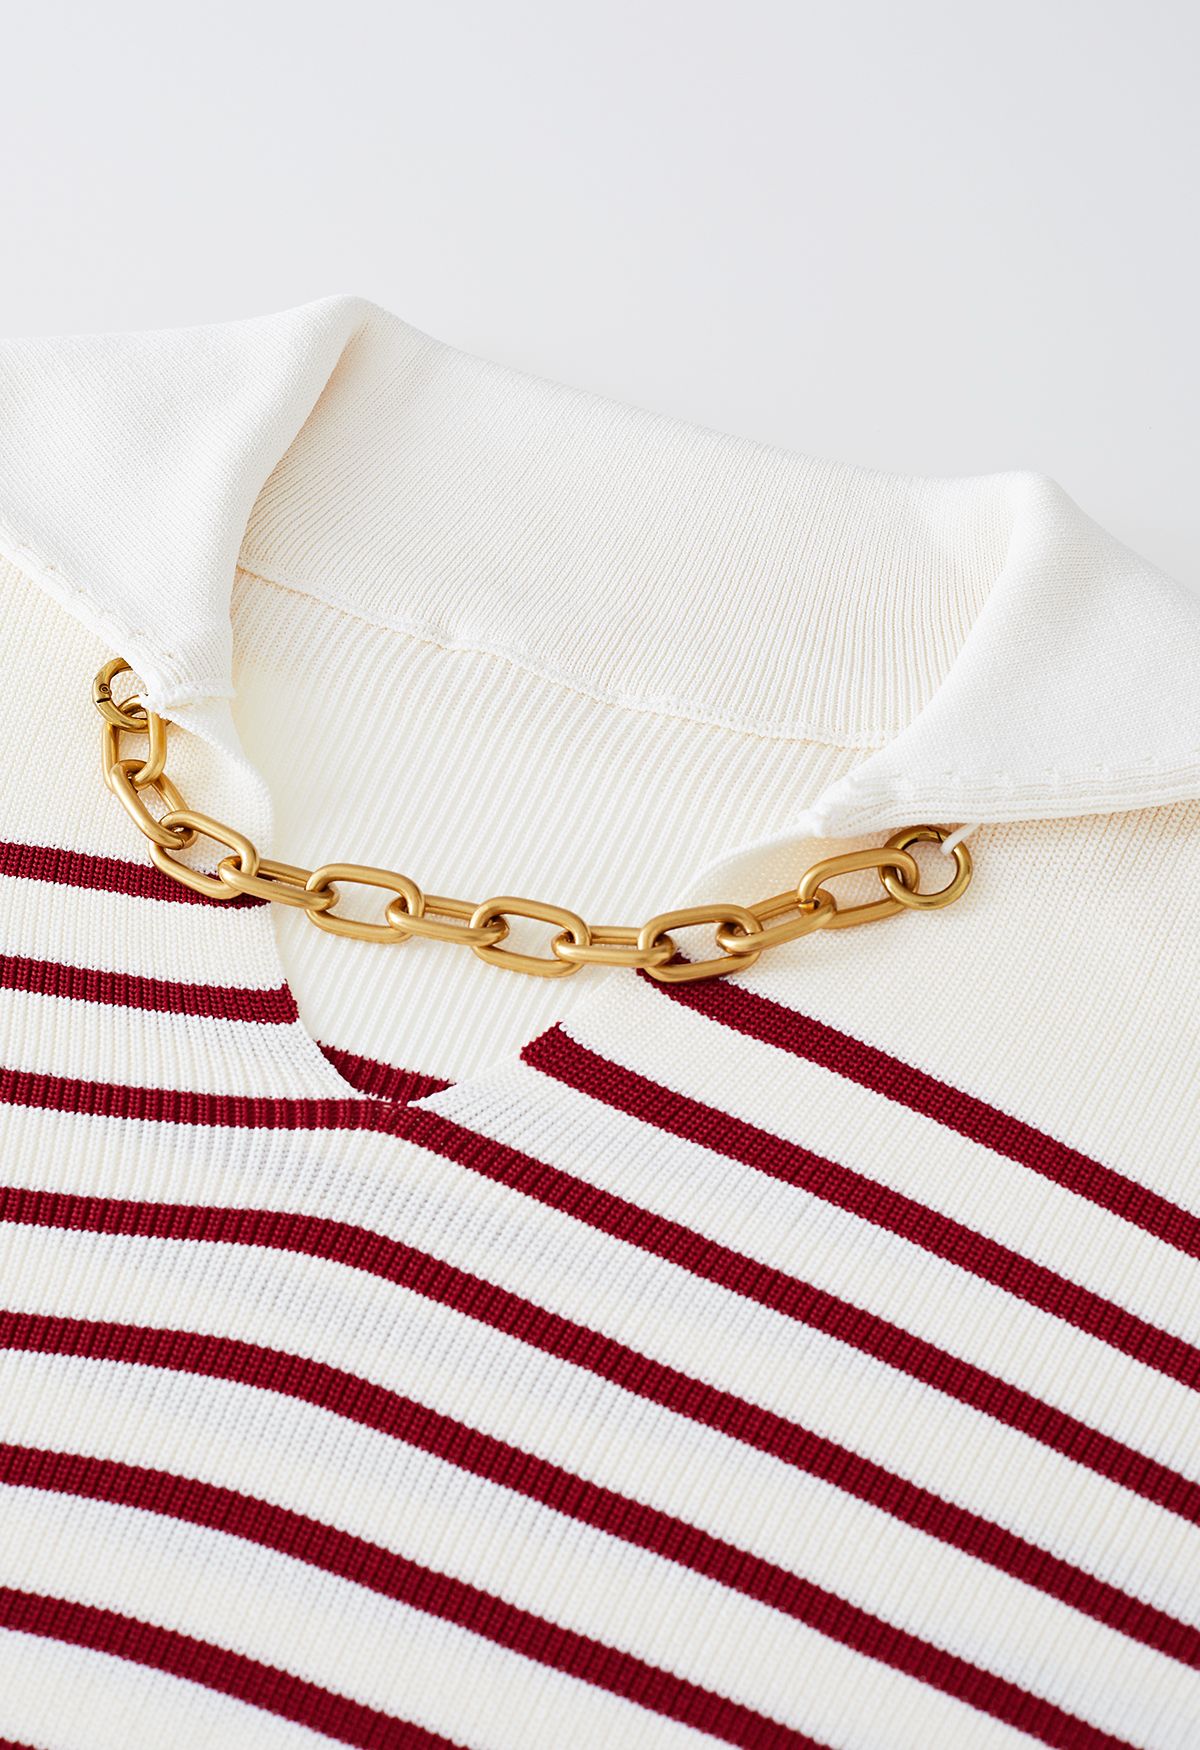 Gold Chain Flap Collar Striped Knit Top in Red